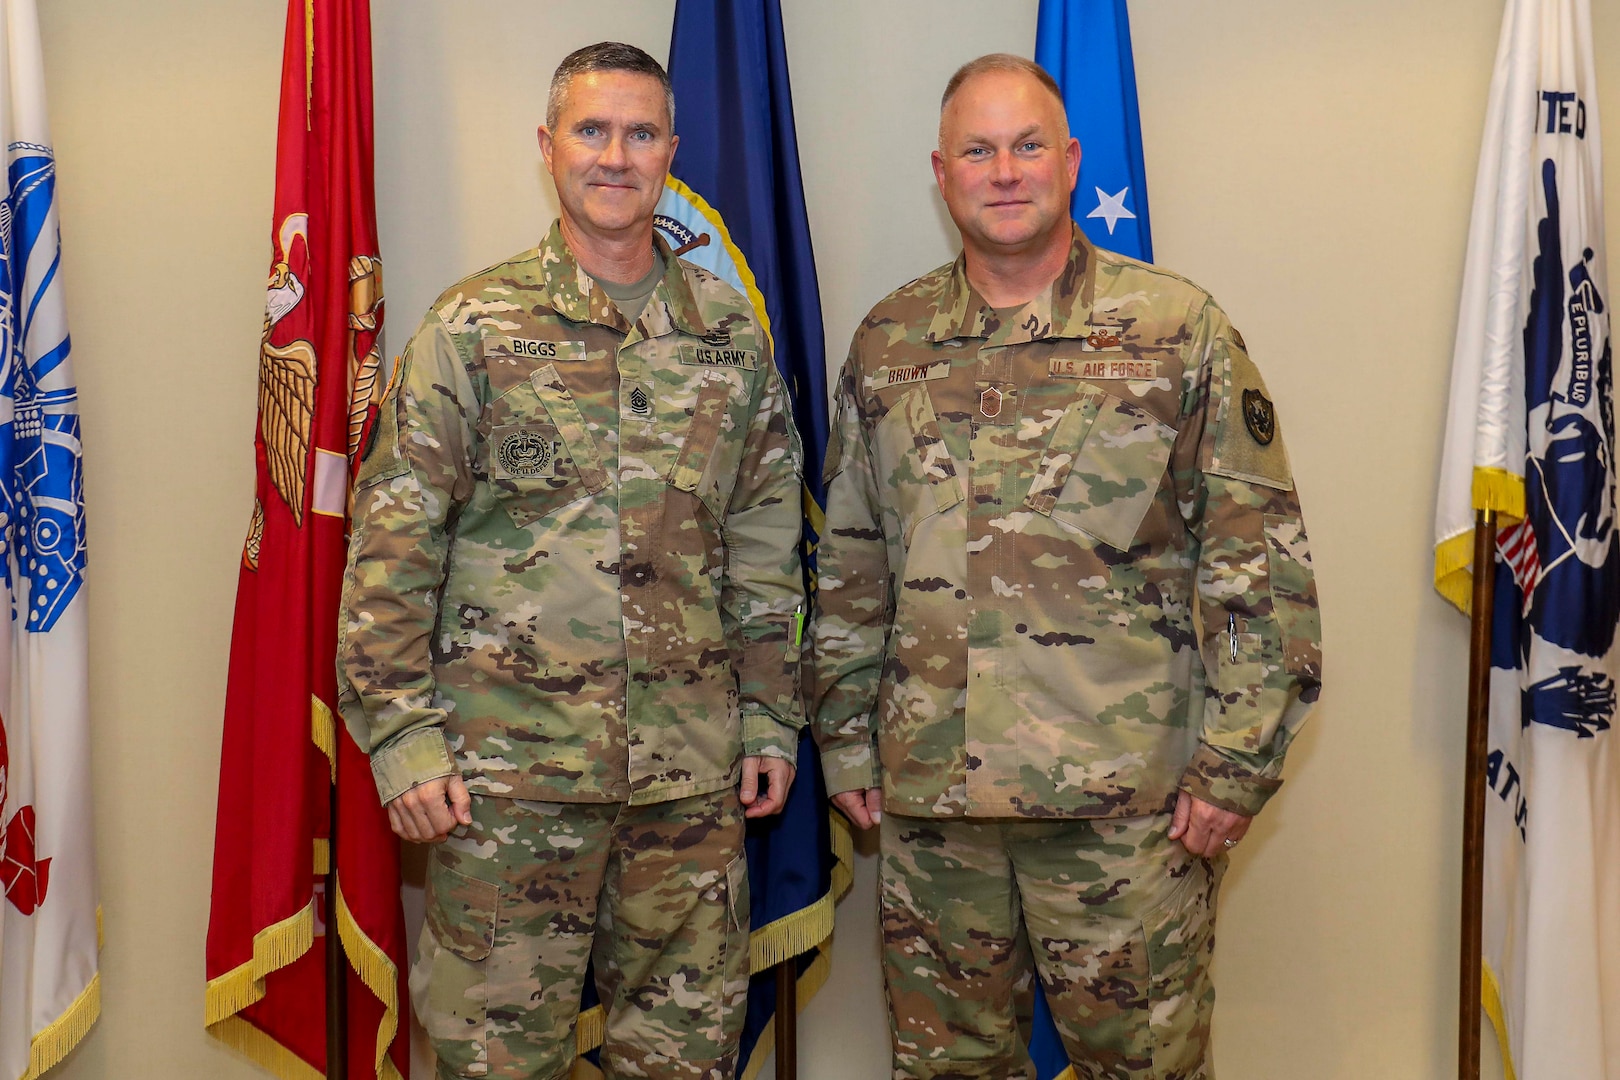 Army Command Sgt. Maj. Paul Biggs (left), Senior Enlisted Leader for Futures and Concepts Center, a subordinate organization of Army Futures Command in Austin, TX., poses for a photo with Air Force Chief Master Sgt. James Brown (right), Senior Enlisted Leader for Joint Task Force Civil Support (JTF-CS), at the JTF-CS headquarters at Fort Eustis. Futures and Concepts Center is located at Army Training and Doctrine Command, also headquartered at Fort Eustis and adjacent to JTF-CS. The visit was held to foster friendship and teamwork between the military neighbors. (Official DoD photo by Navy Petty Officer Third Class Michael Redd/released)